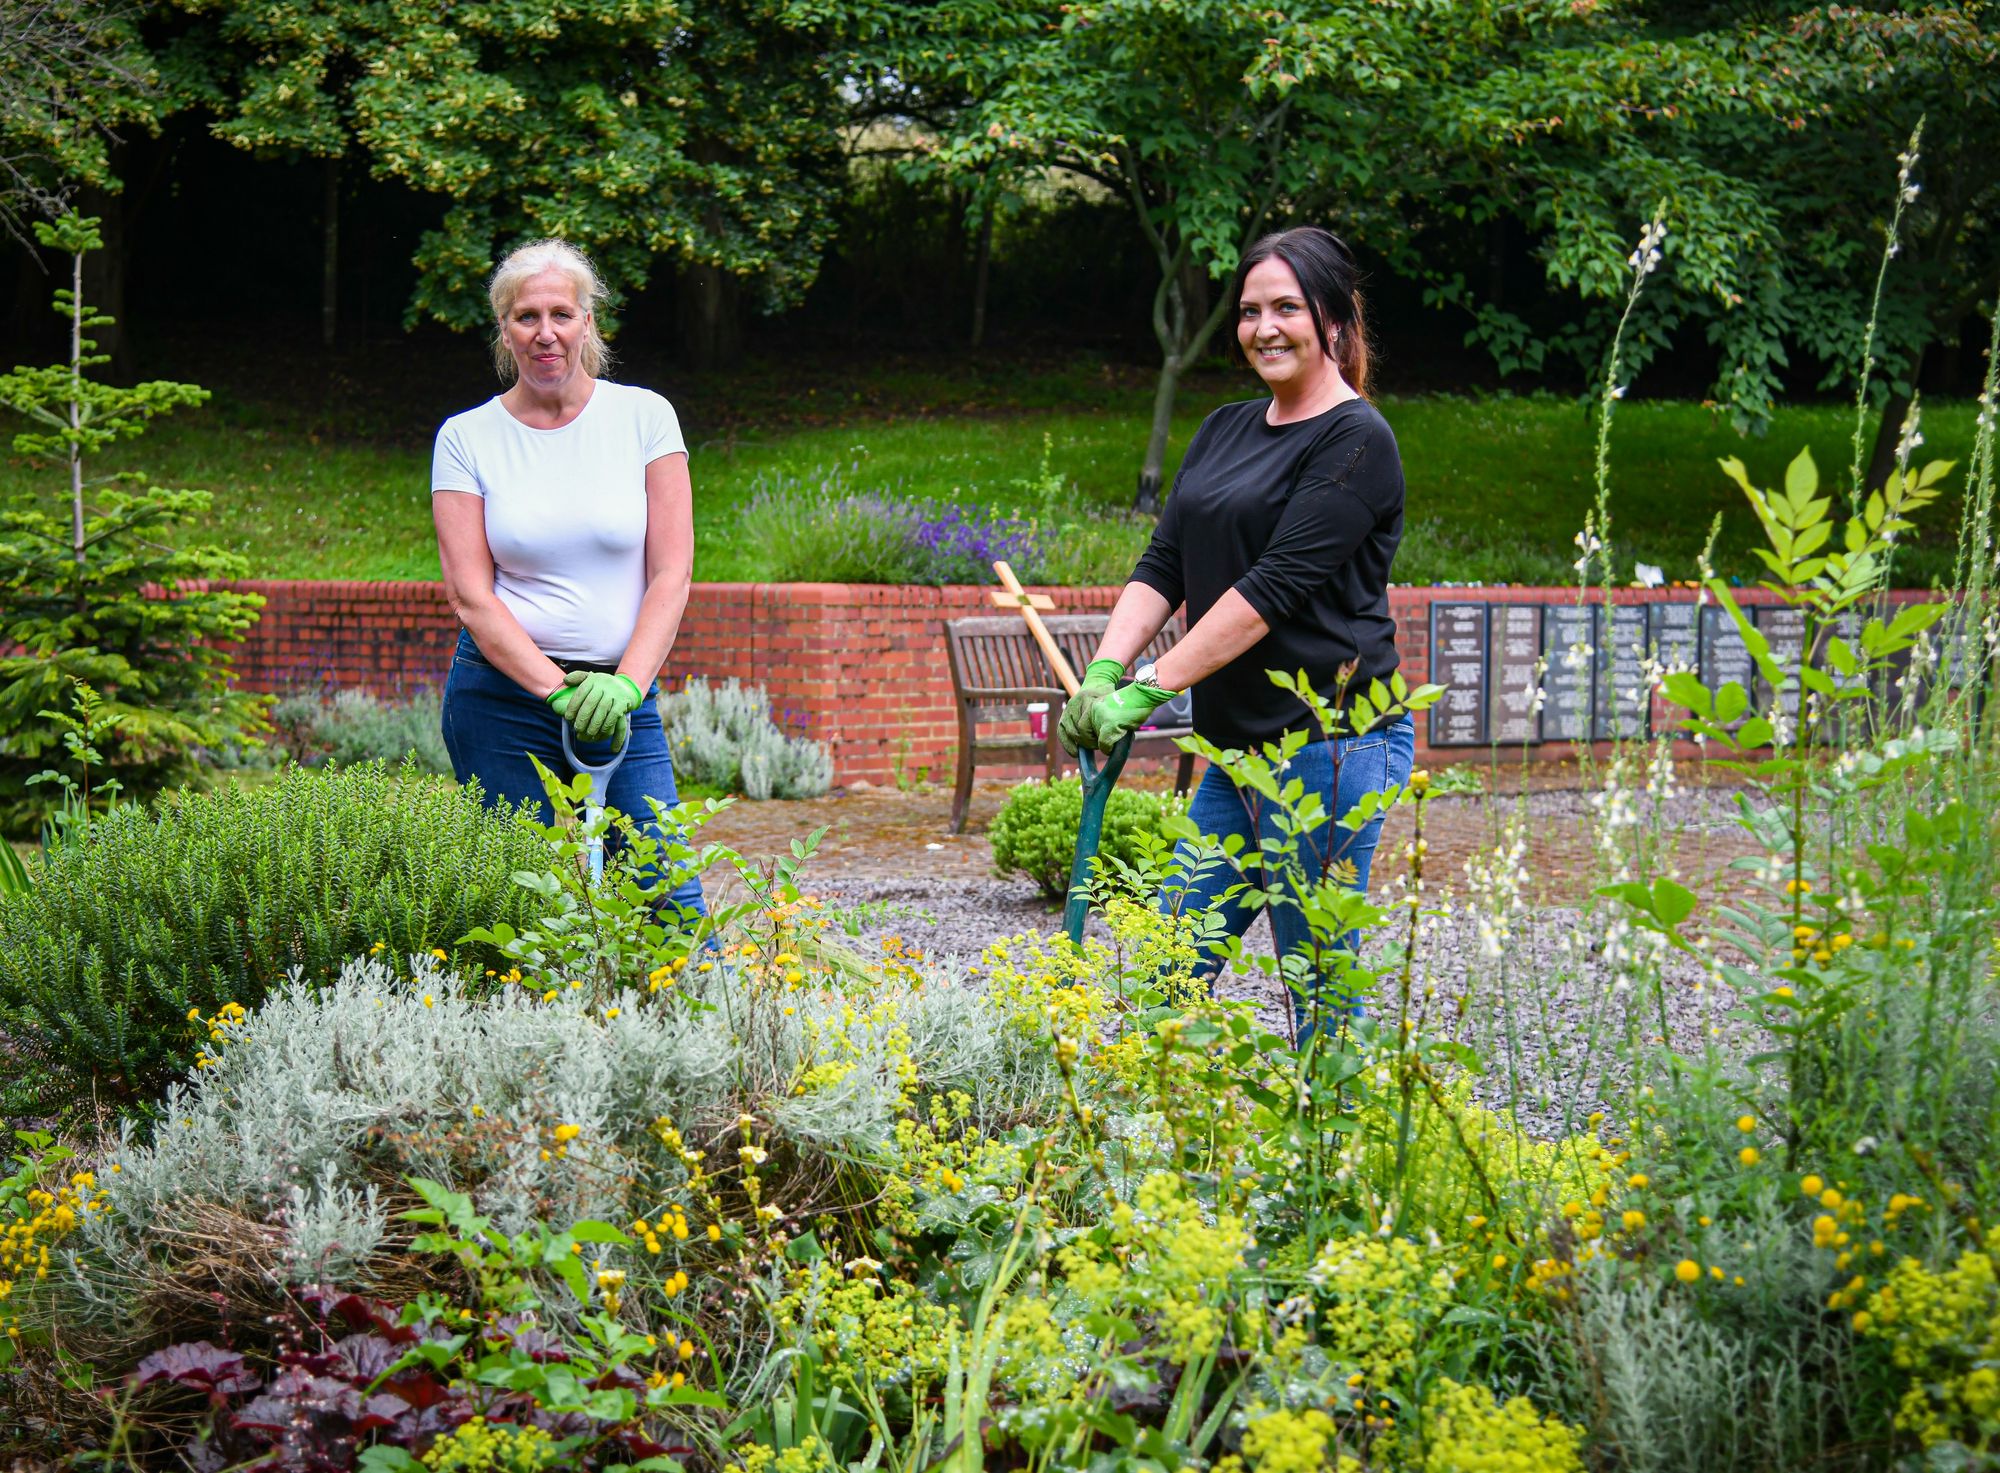 Funeral directors' project to transform cemetery garden to create ‘sanctuary’ for families